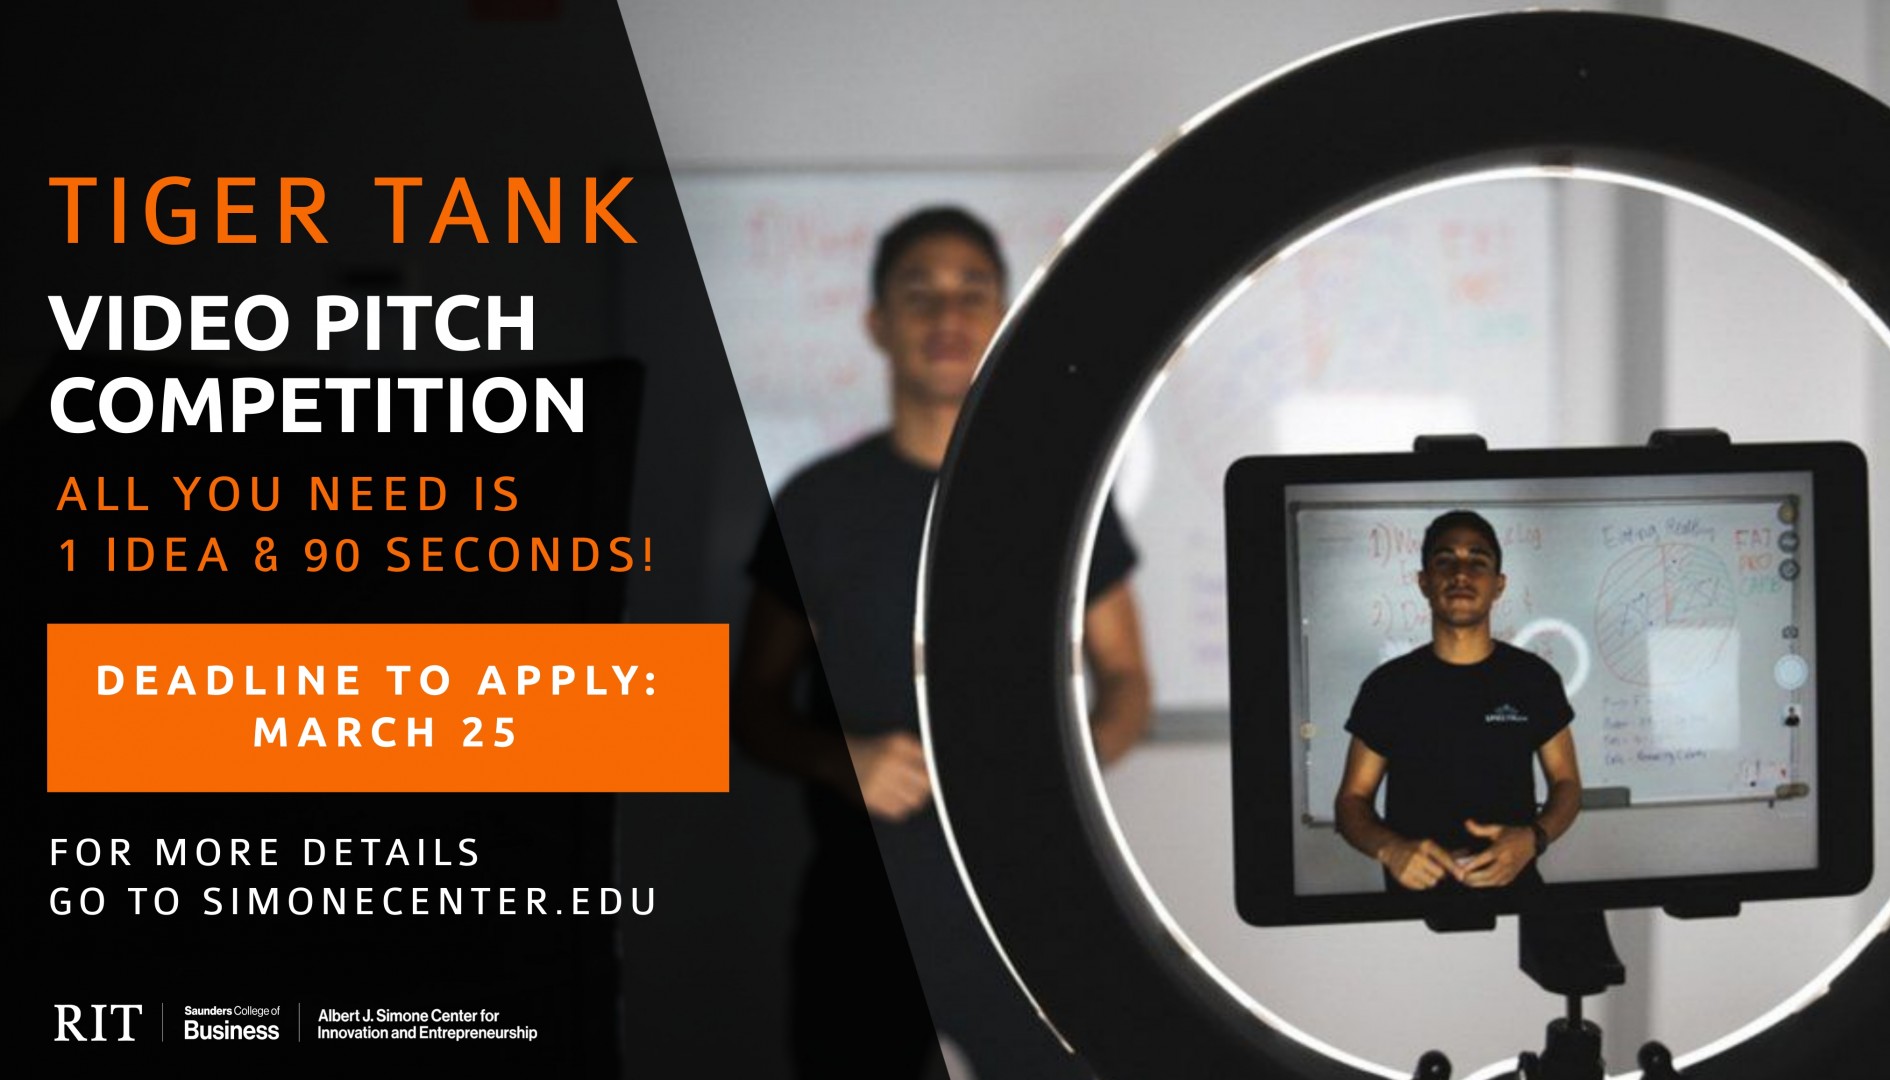 Tiger Tank Video Pitch Competition - Deadline to apply:  March 25